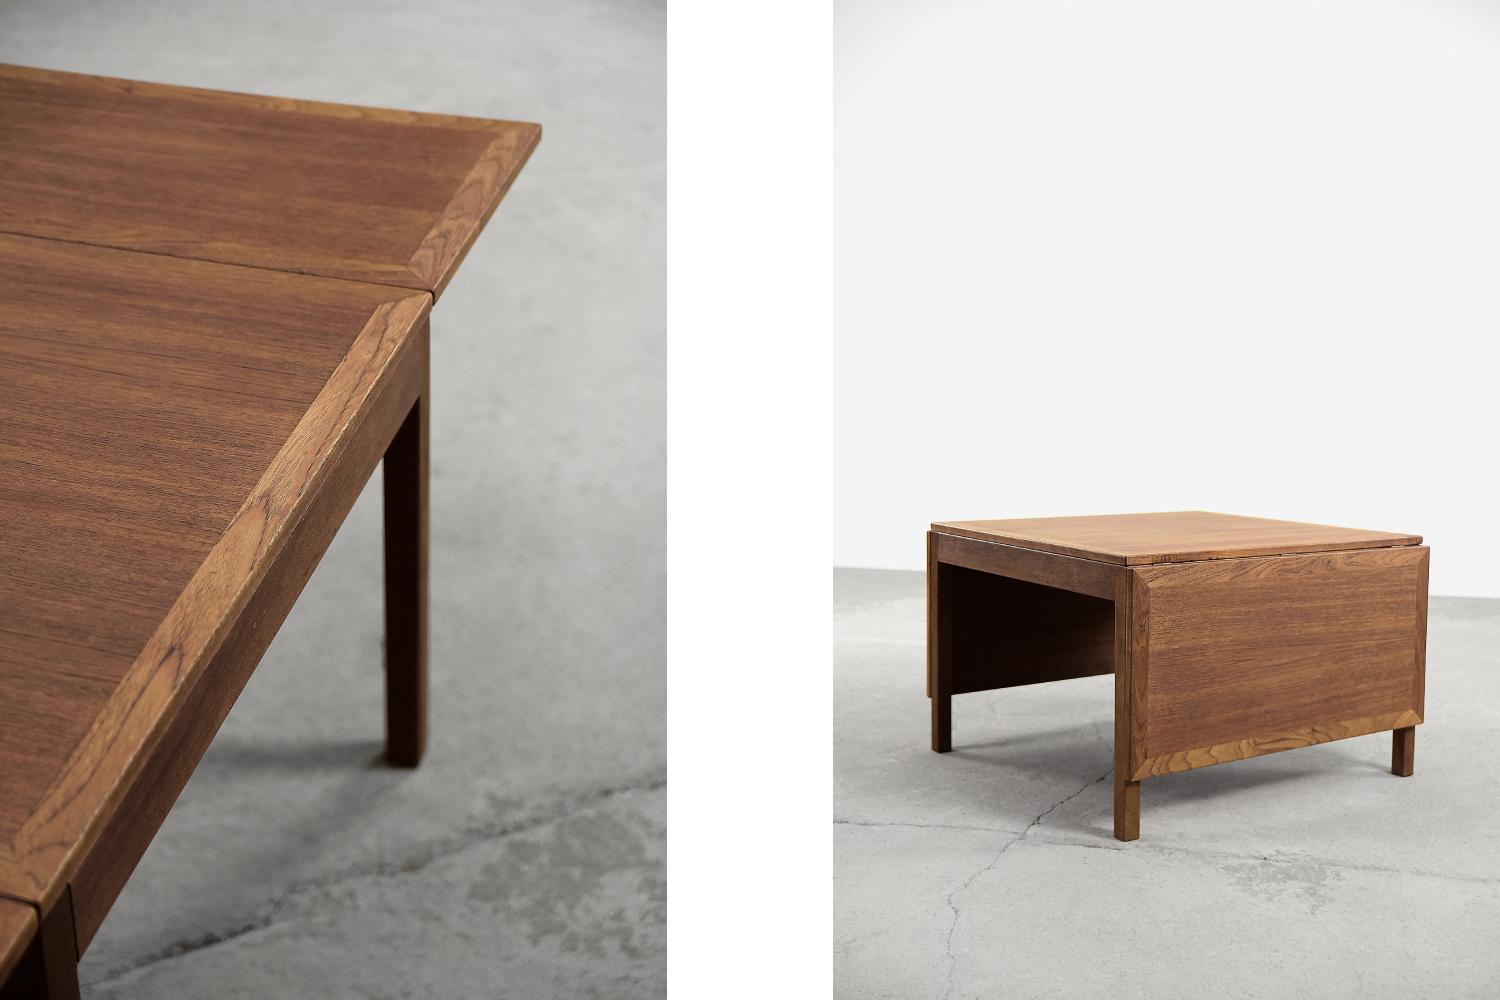 Mid-20th Century Vintage Modern Danish Teak Wood Coffee Table by Børge Mogensen for Fredericia For Sale